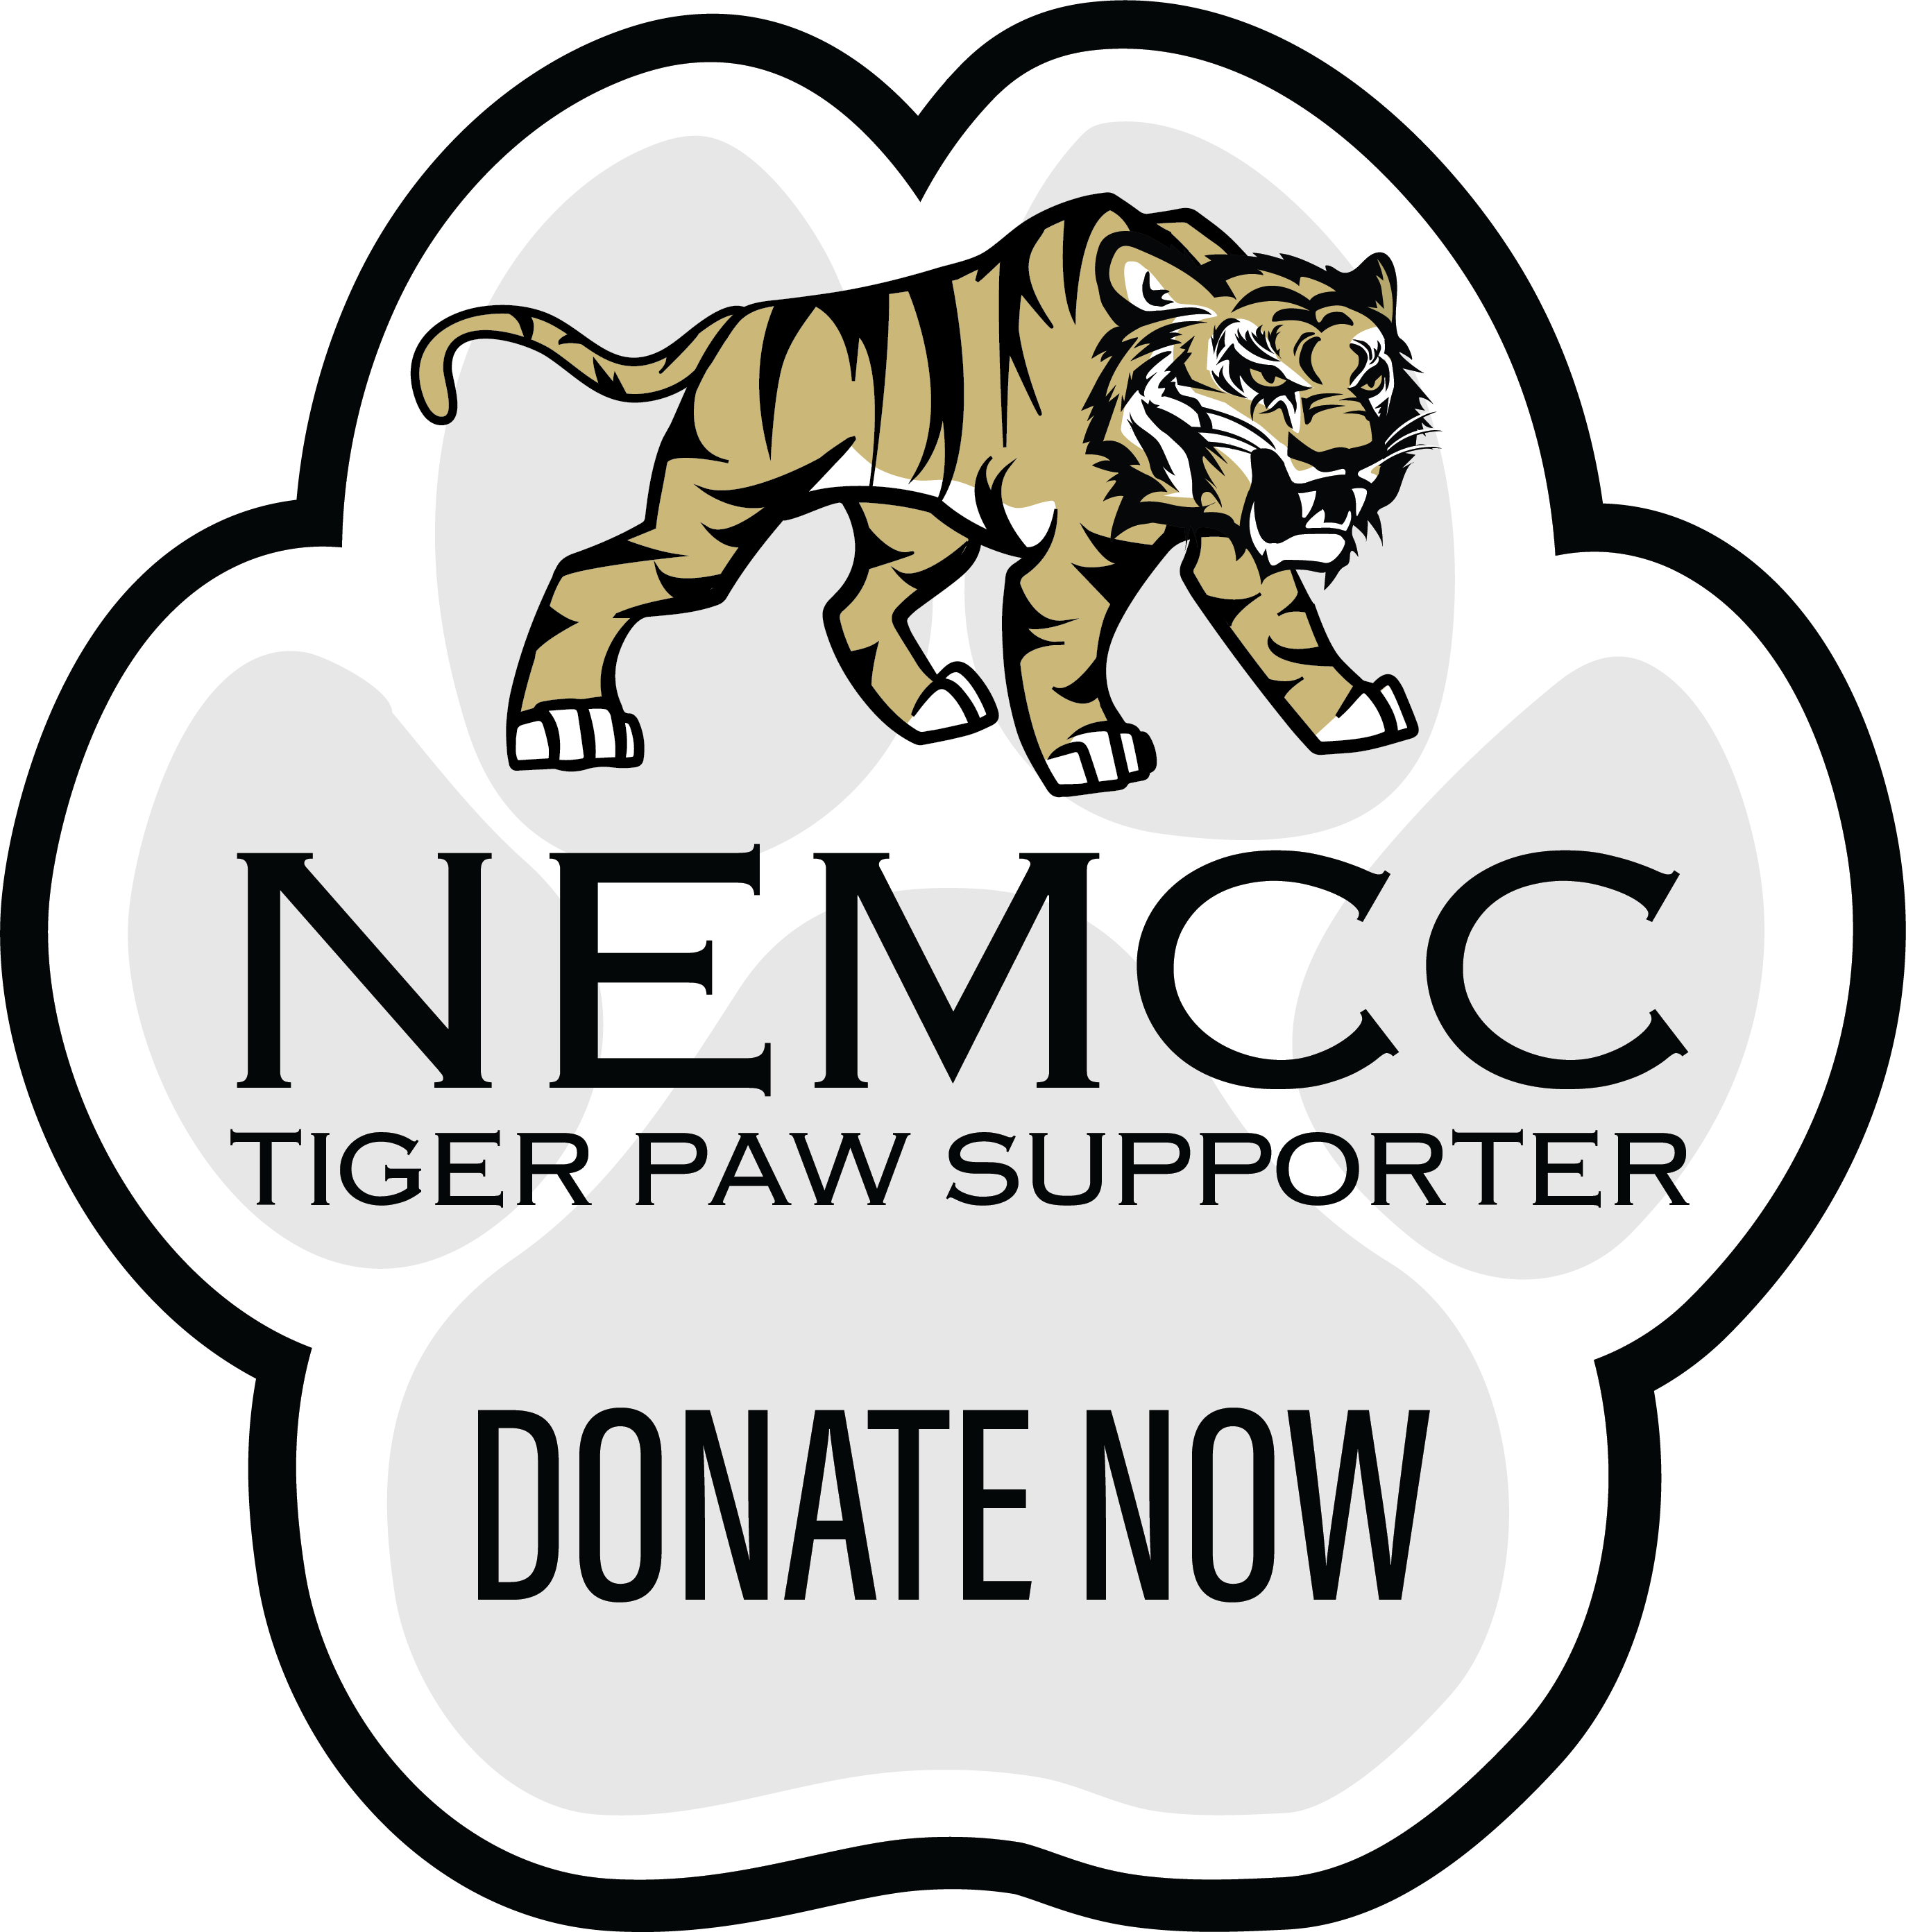 Become a Tiger Paw Supporter